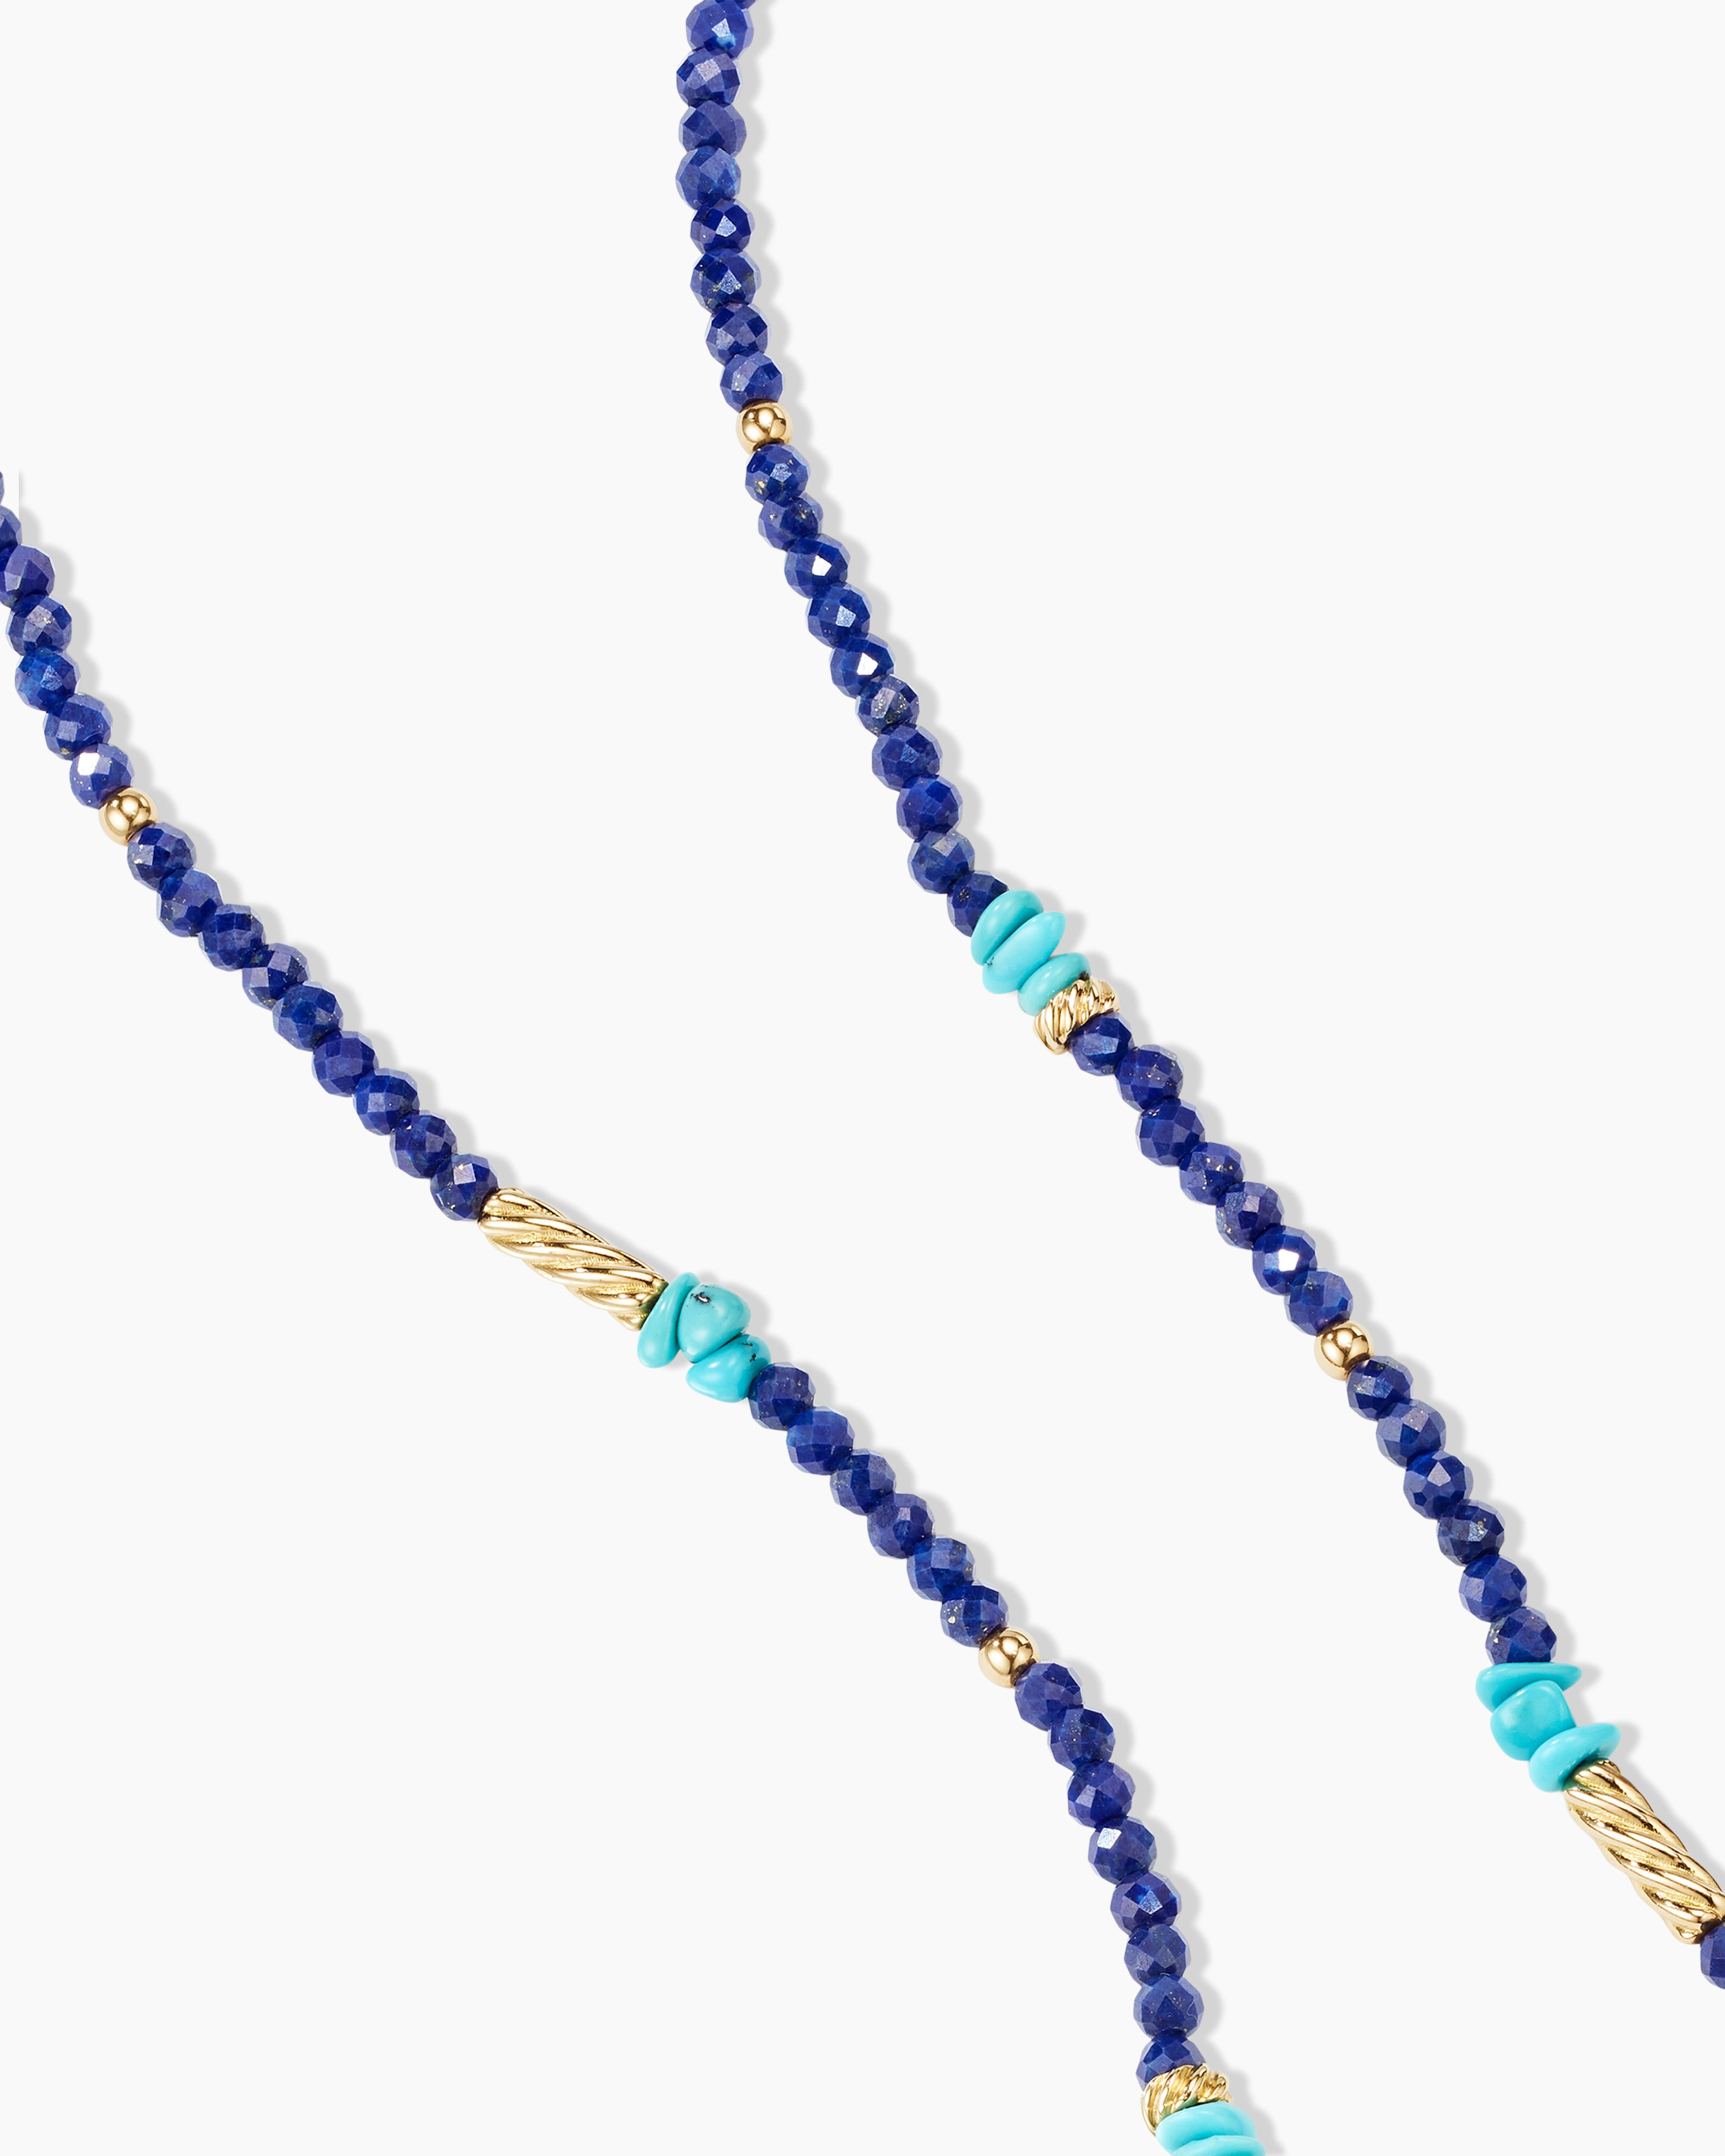 David Yurman Color Bead Necklace in 18K Yellow Gold with Lapis and Turquoise, 4mm Women's Size 20 in